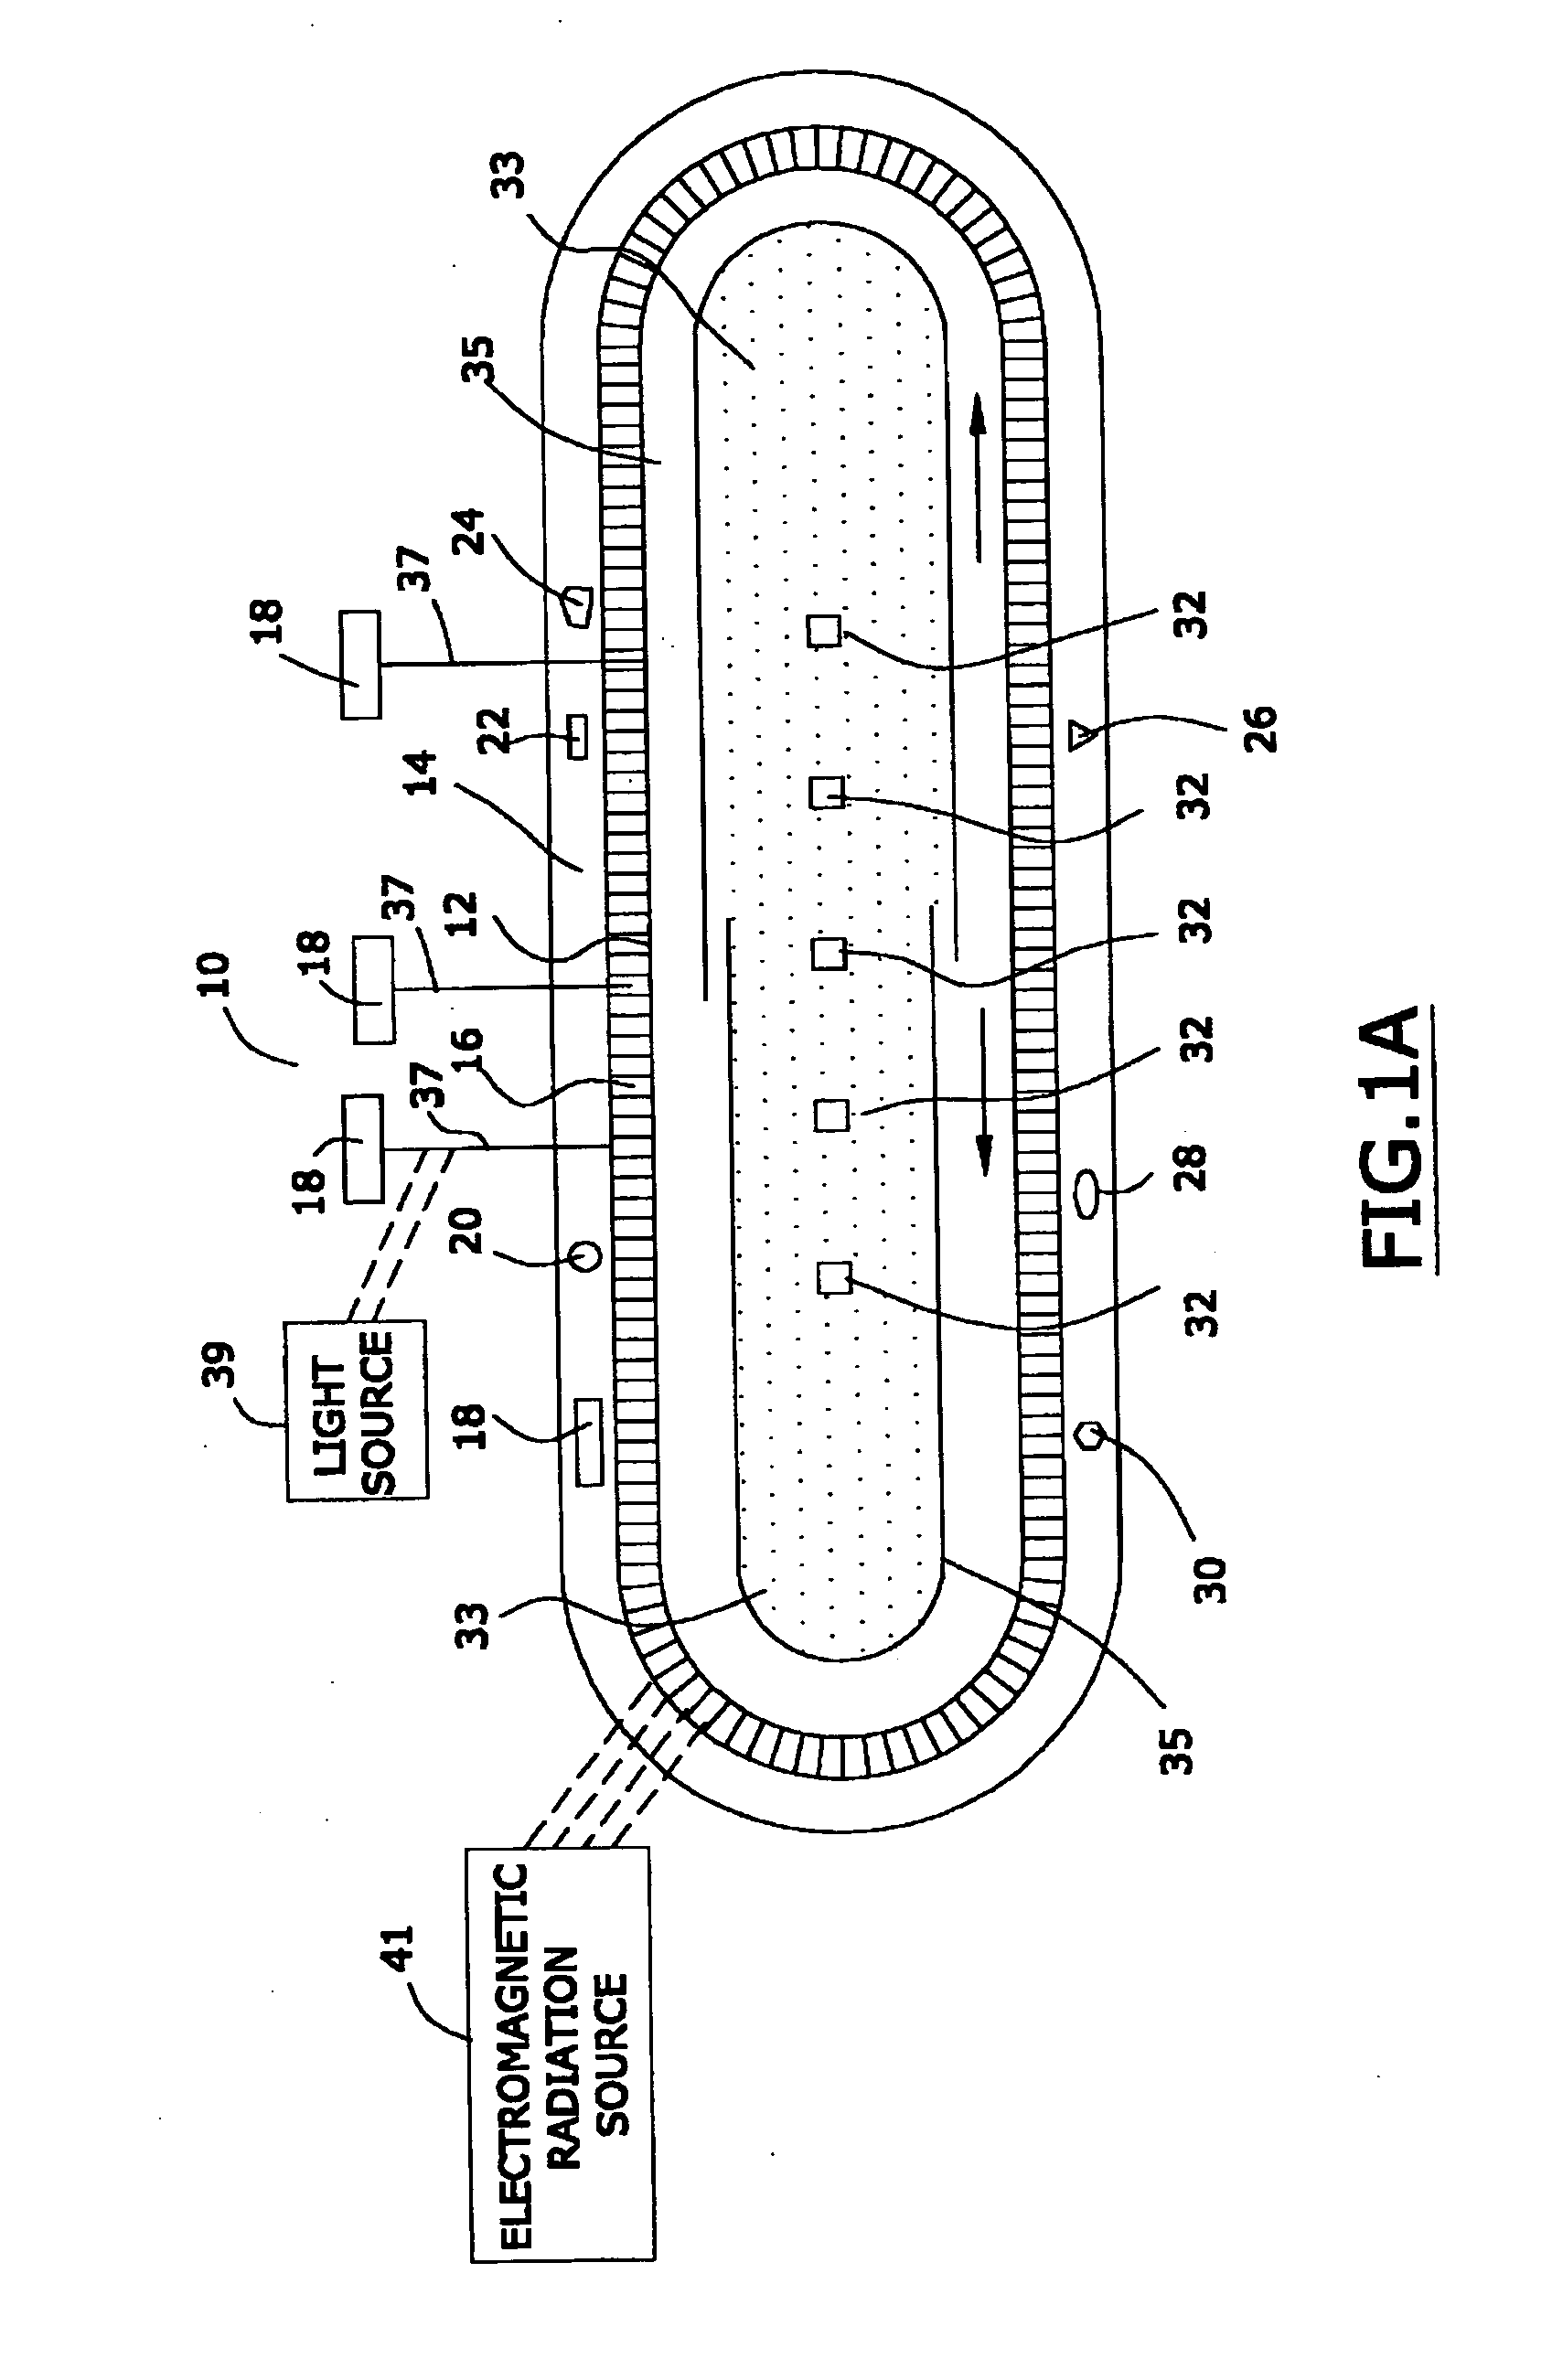 MRI imageable medical device